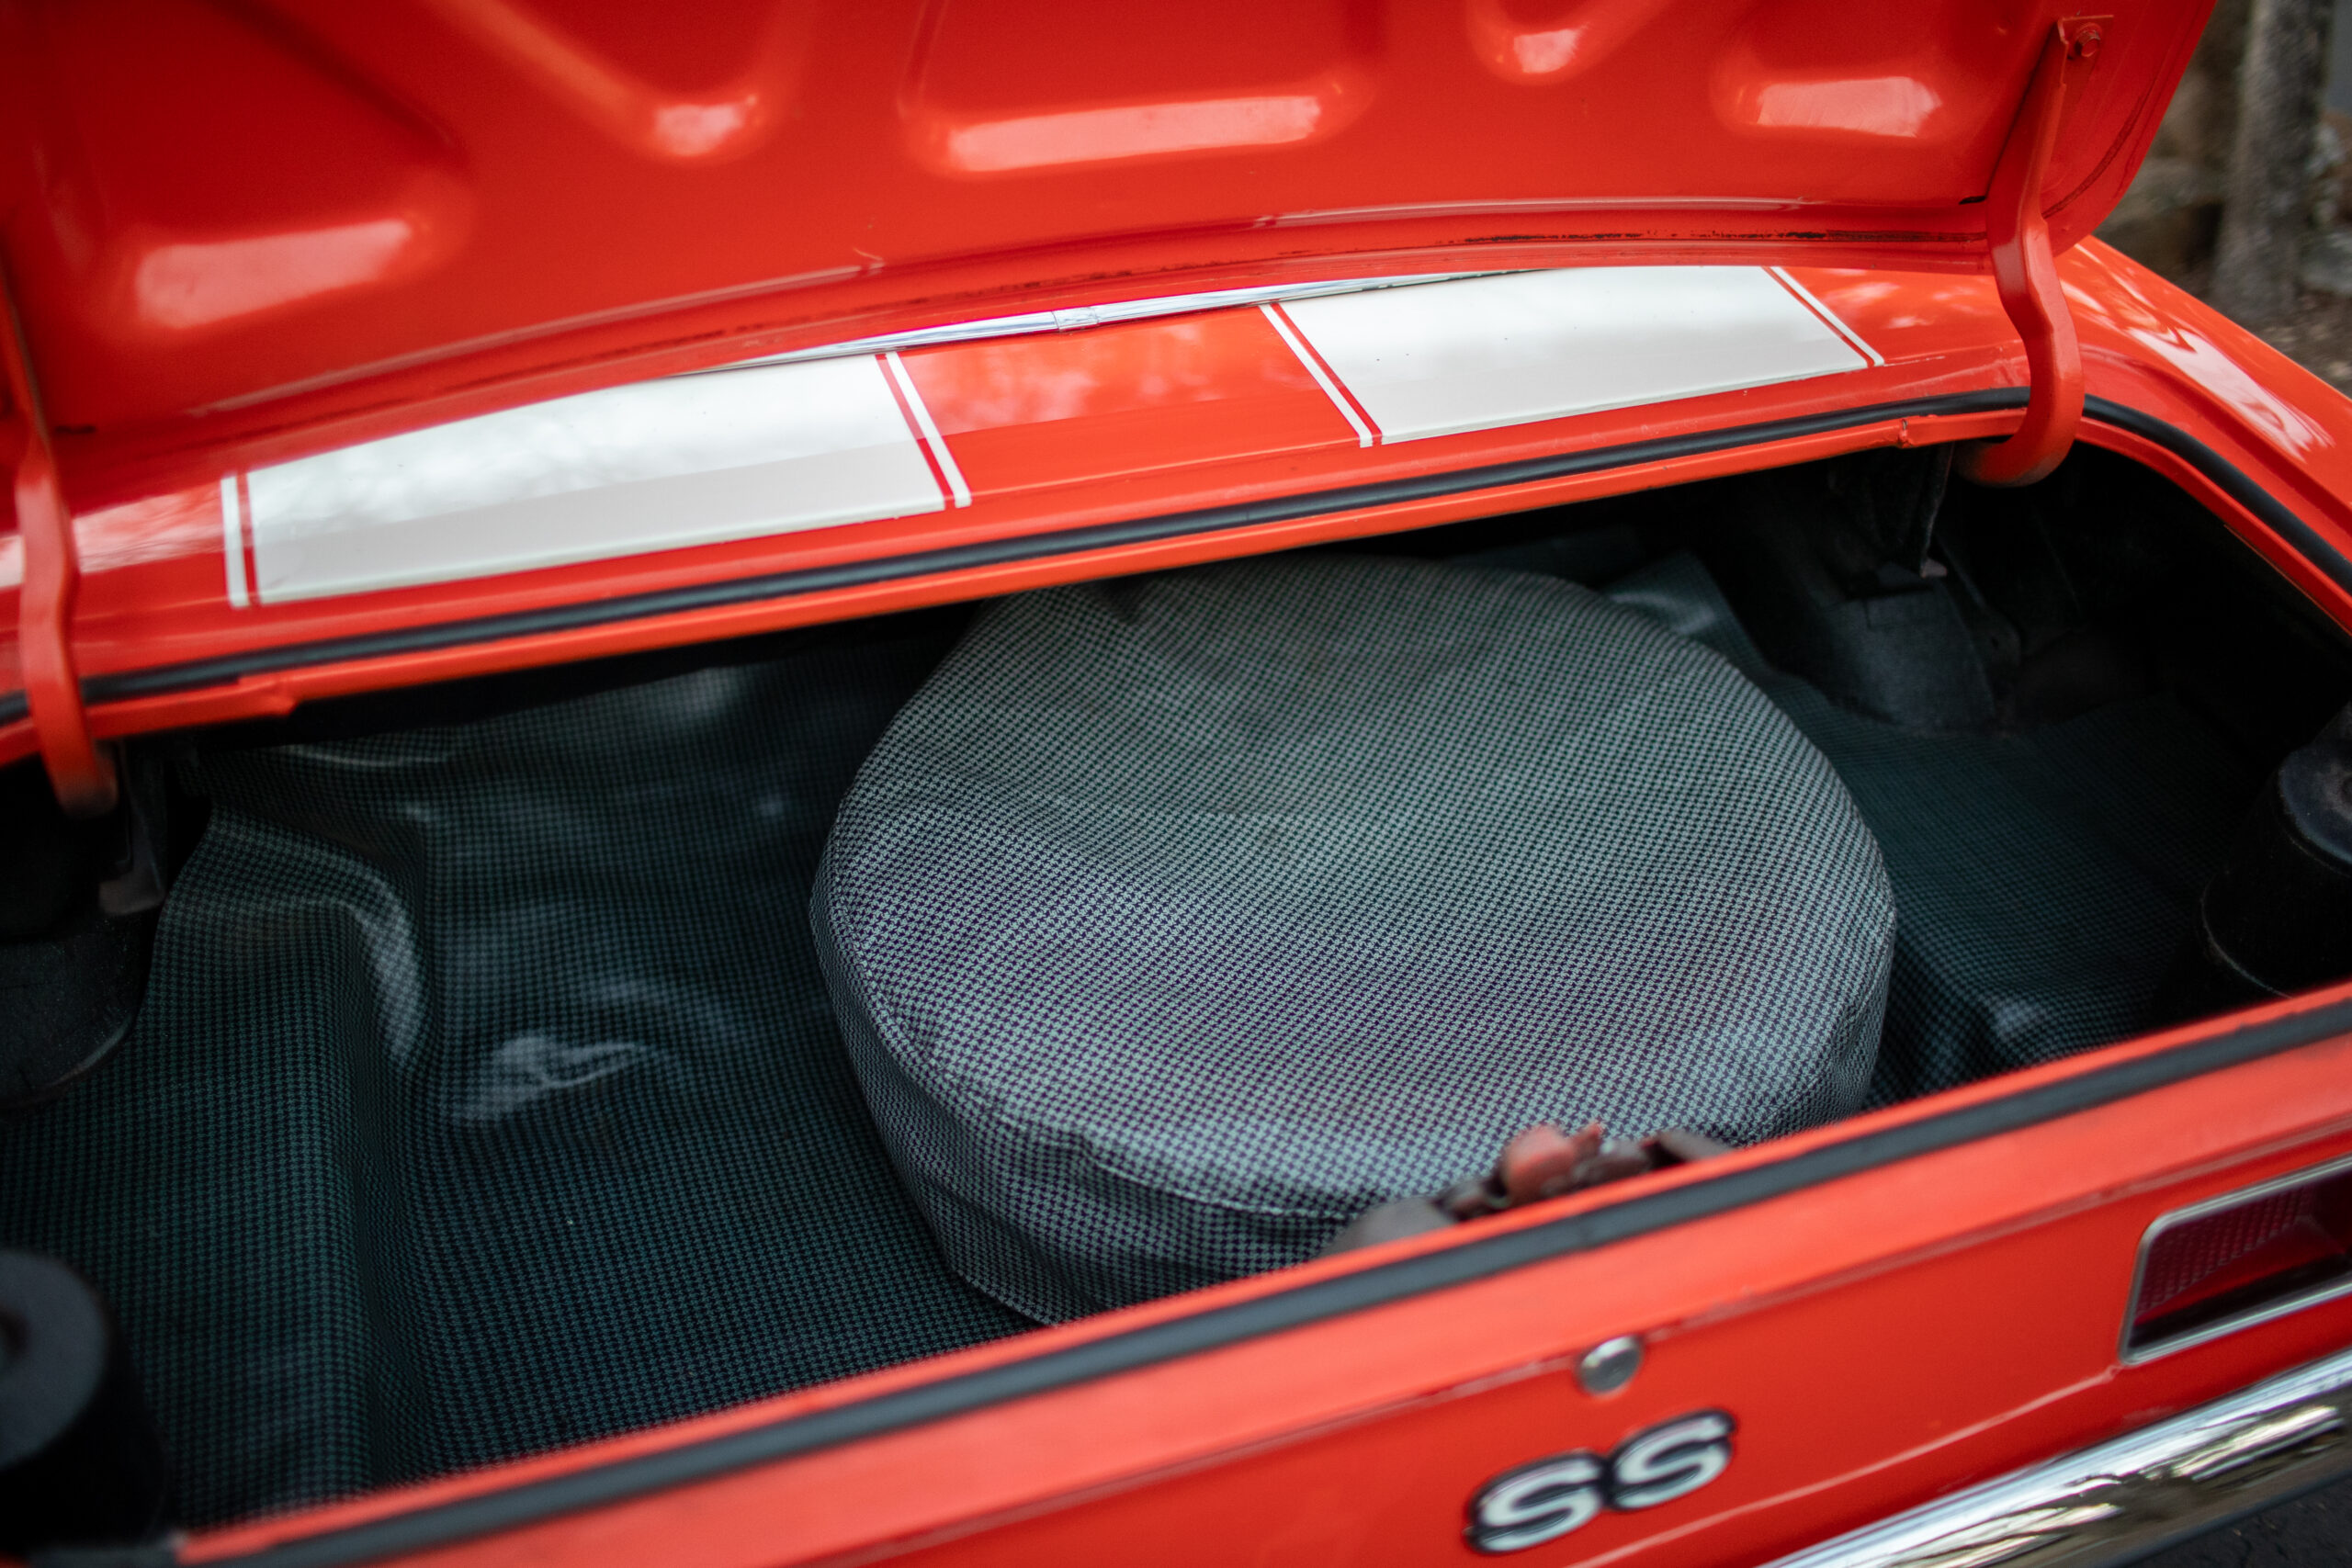 Open trunk of an orange car, revealing a spare tire covered with a gray, checkered fabric cover. The car's exterior has SS badges and white stripes.